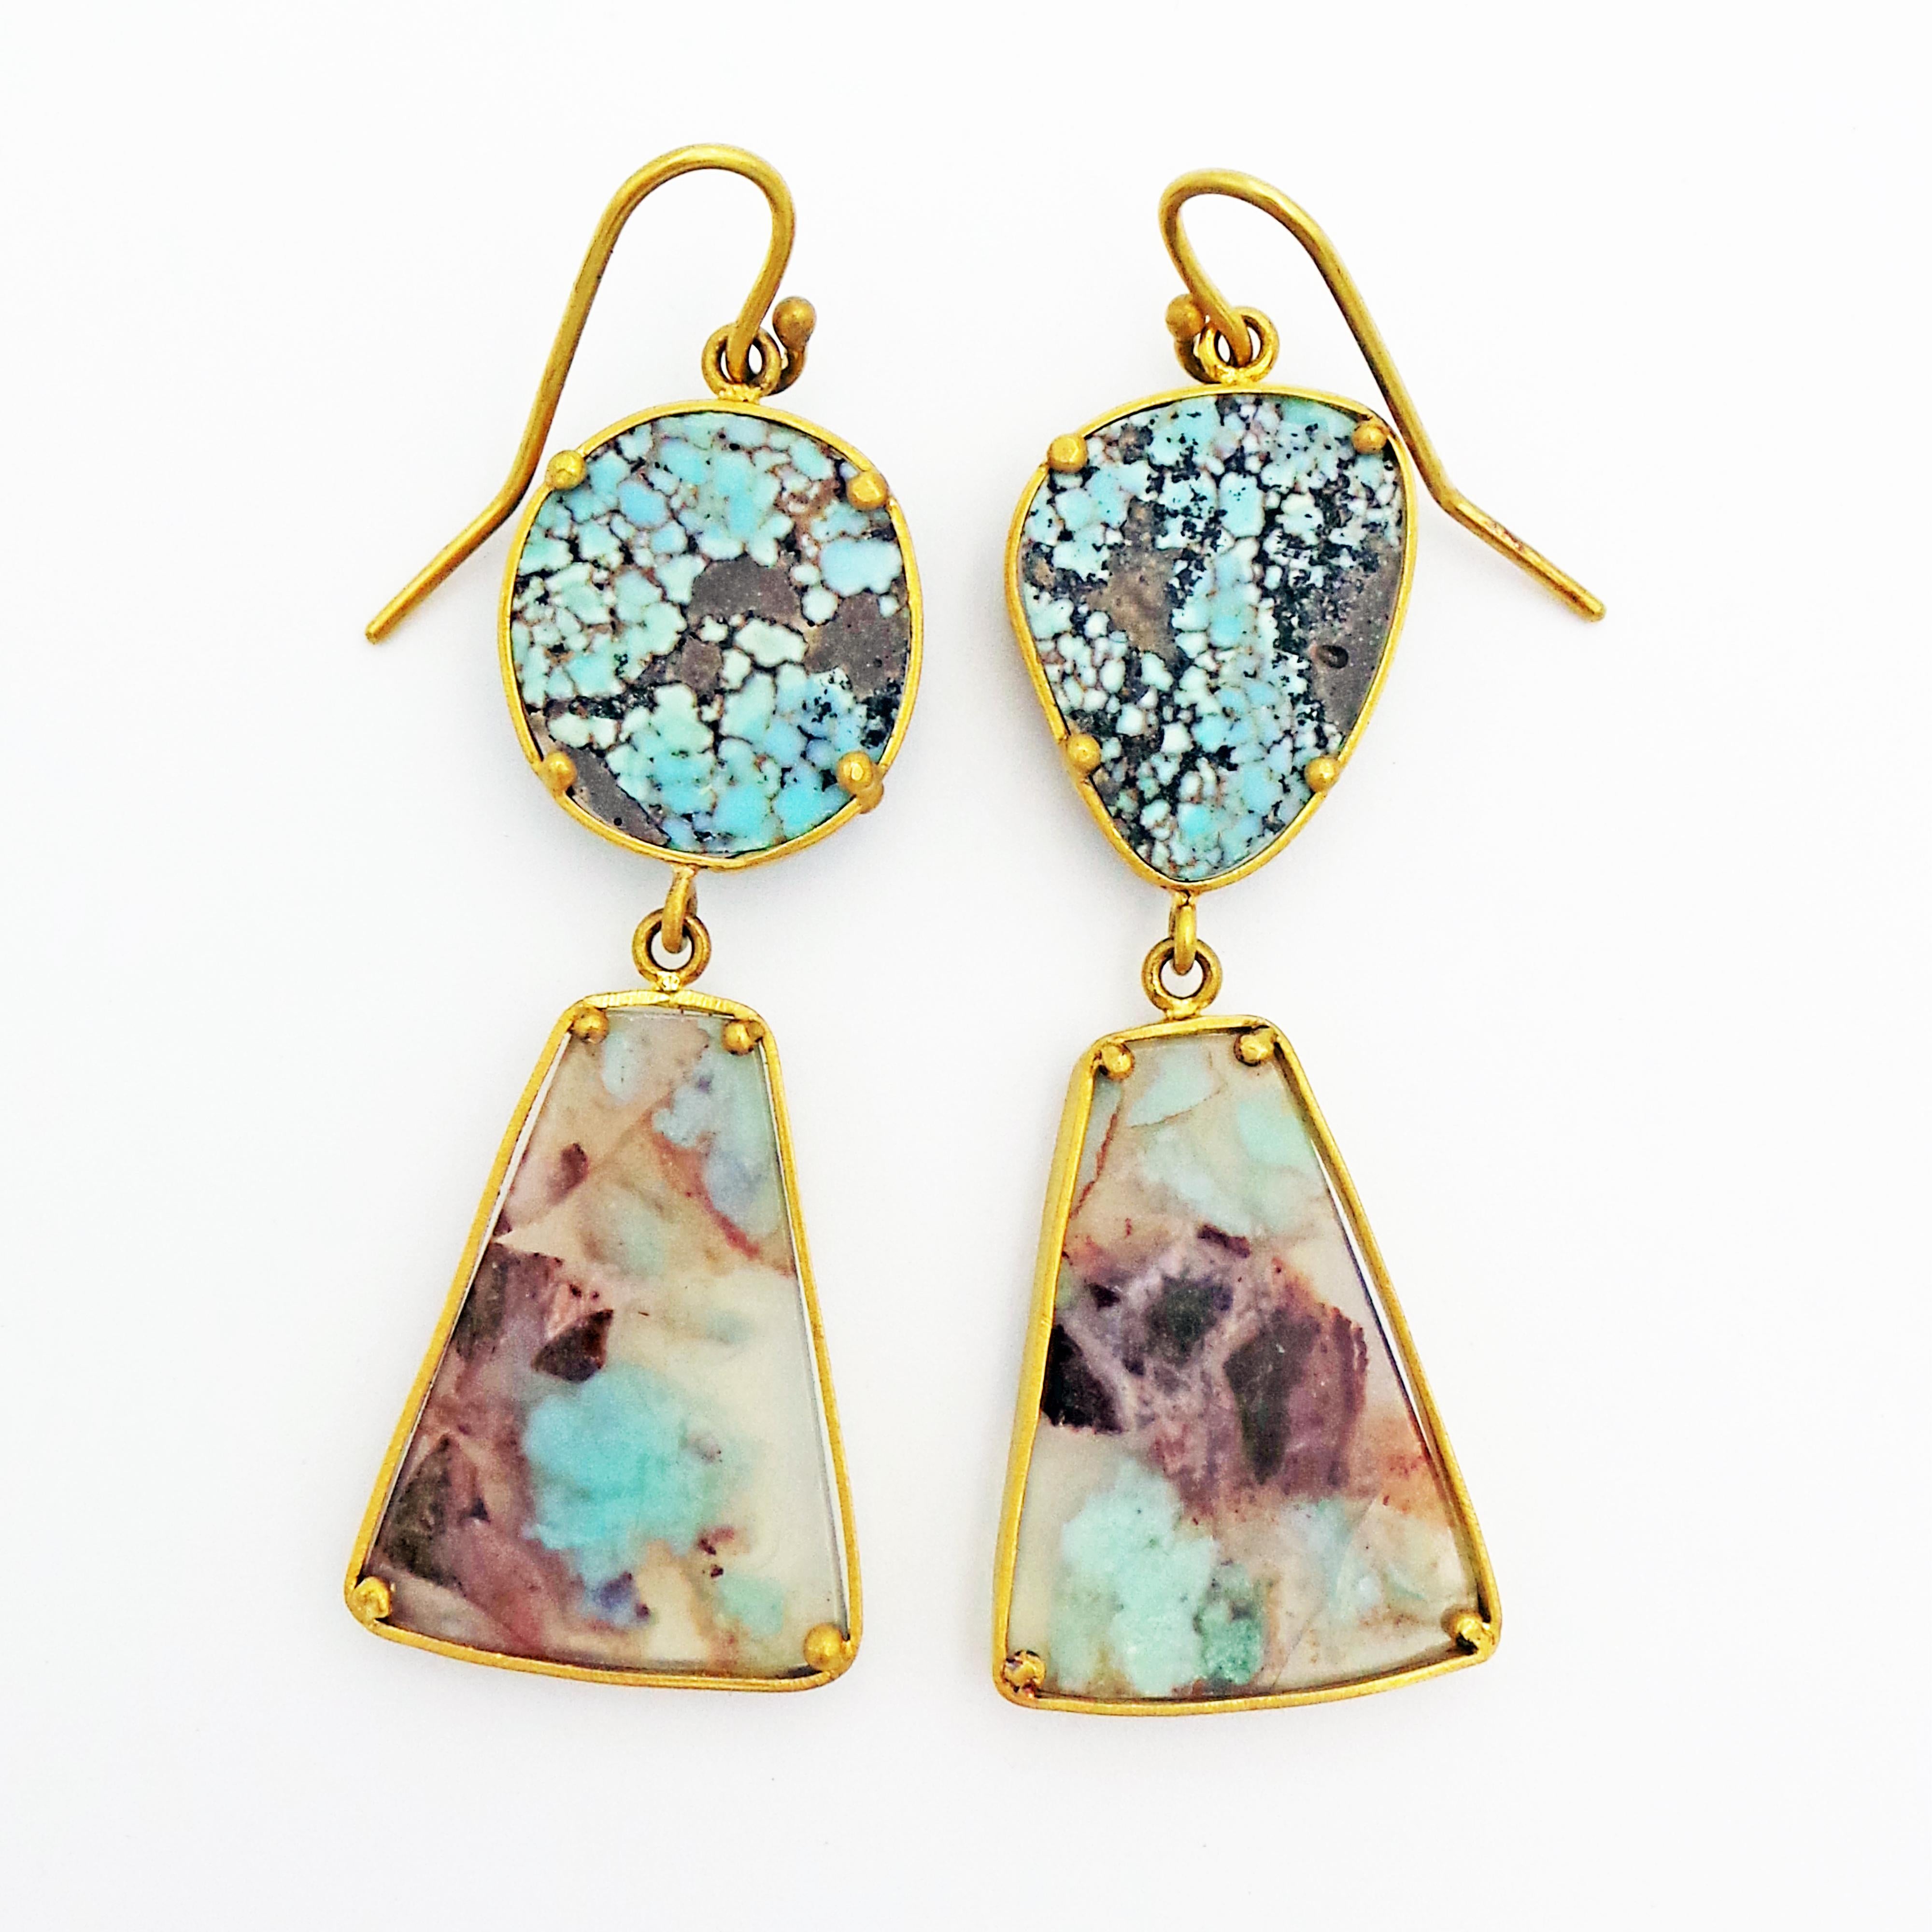 Stunning, hand-forged 22k yellow gold dangle earrings featuring exquisite Aquaprase and Dry Creek Turquoise gemstones. Dangle earrings are 2.75 inches in length. Aquaprase is one of the most recently discovered gemstones, being unearthed in 2014 by